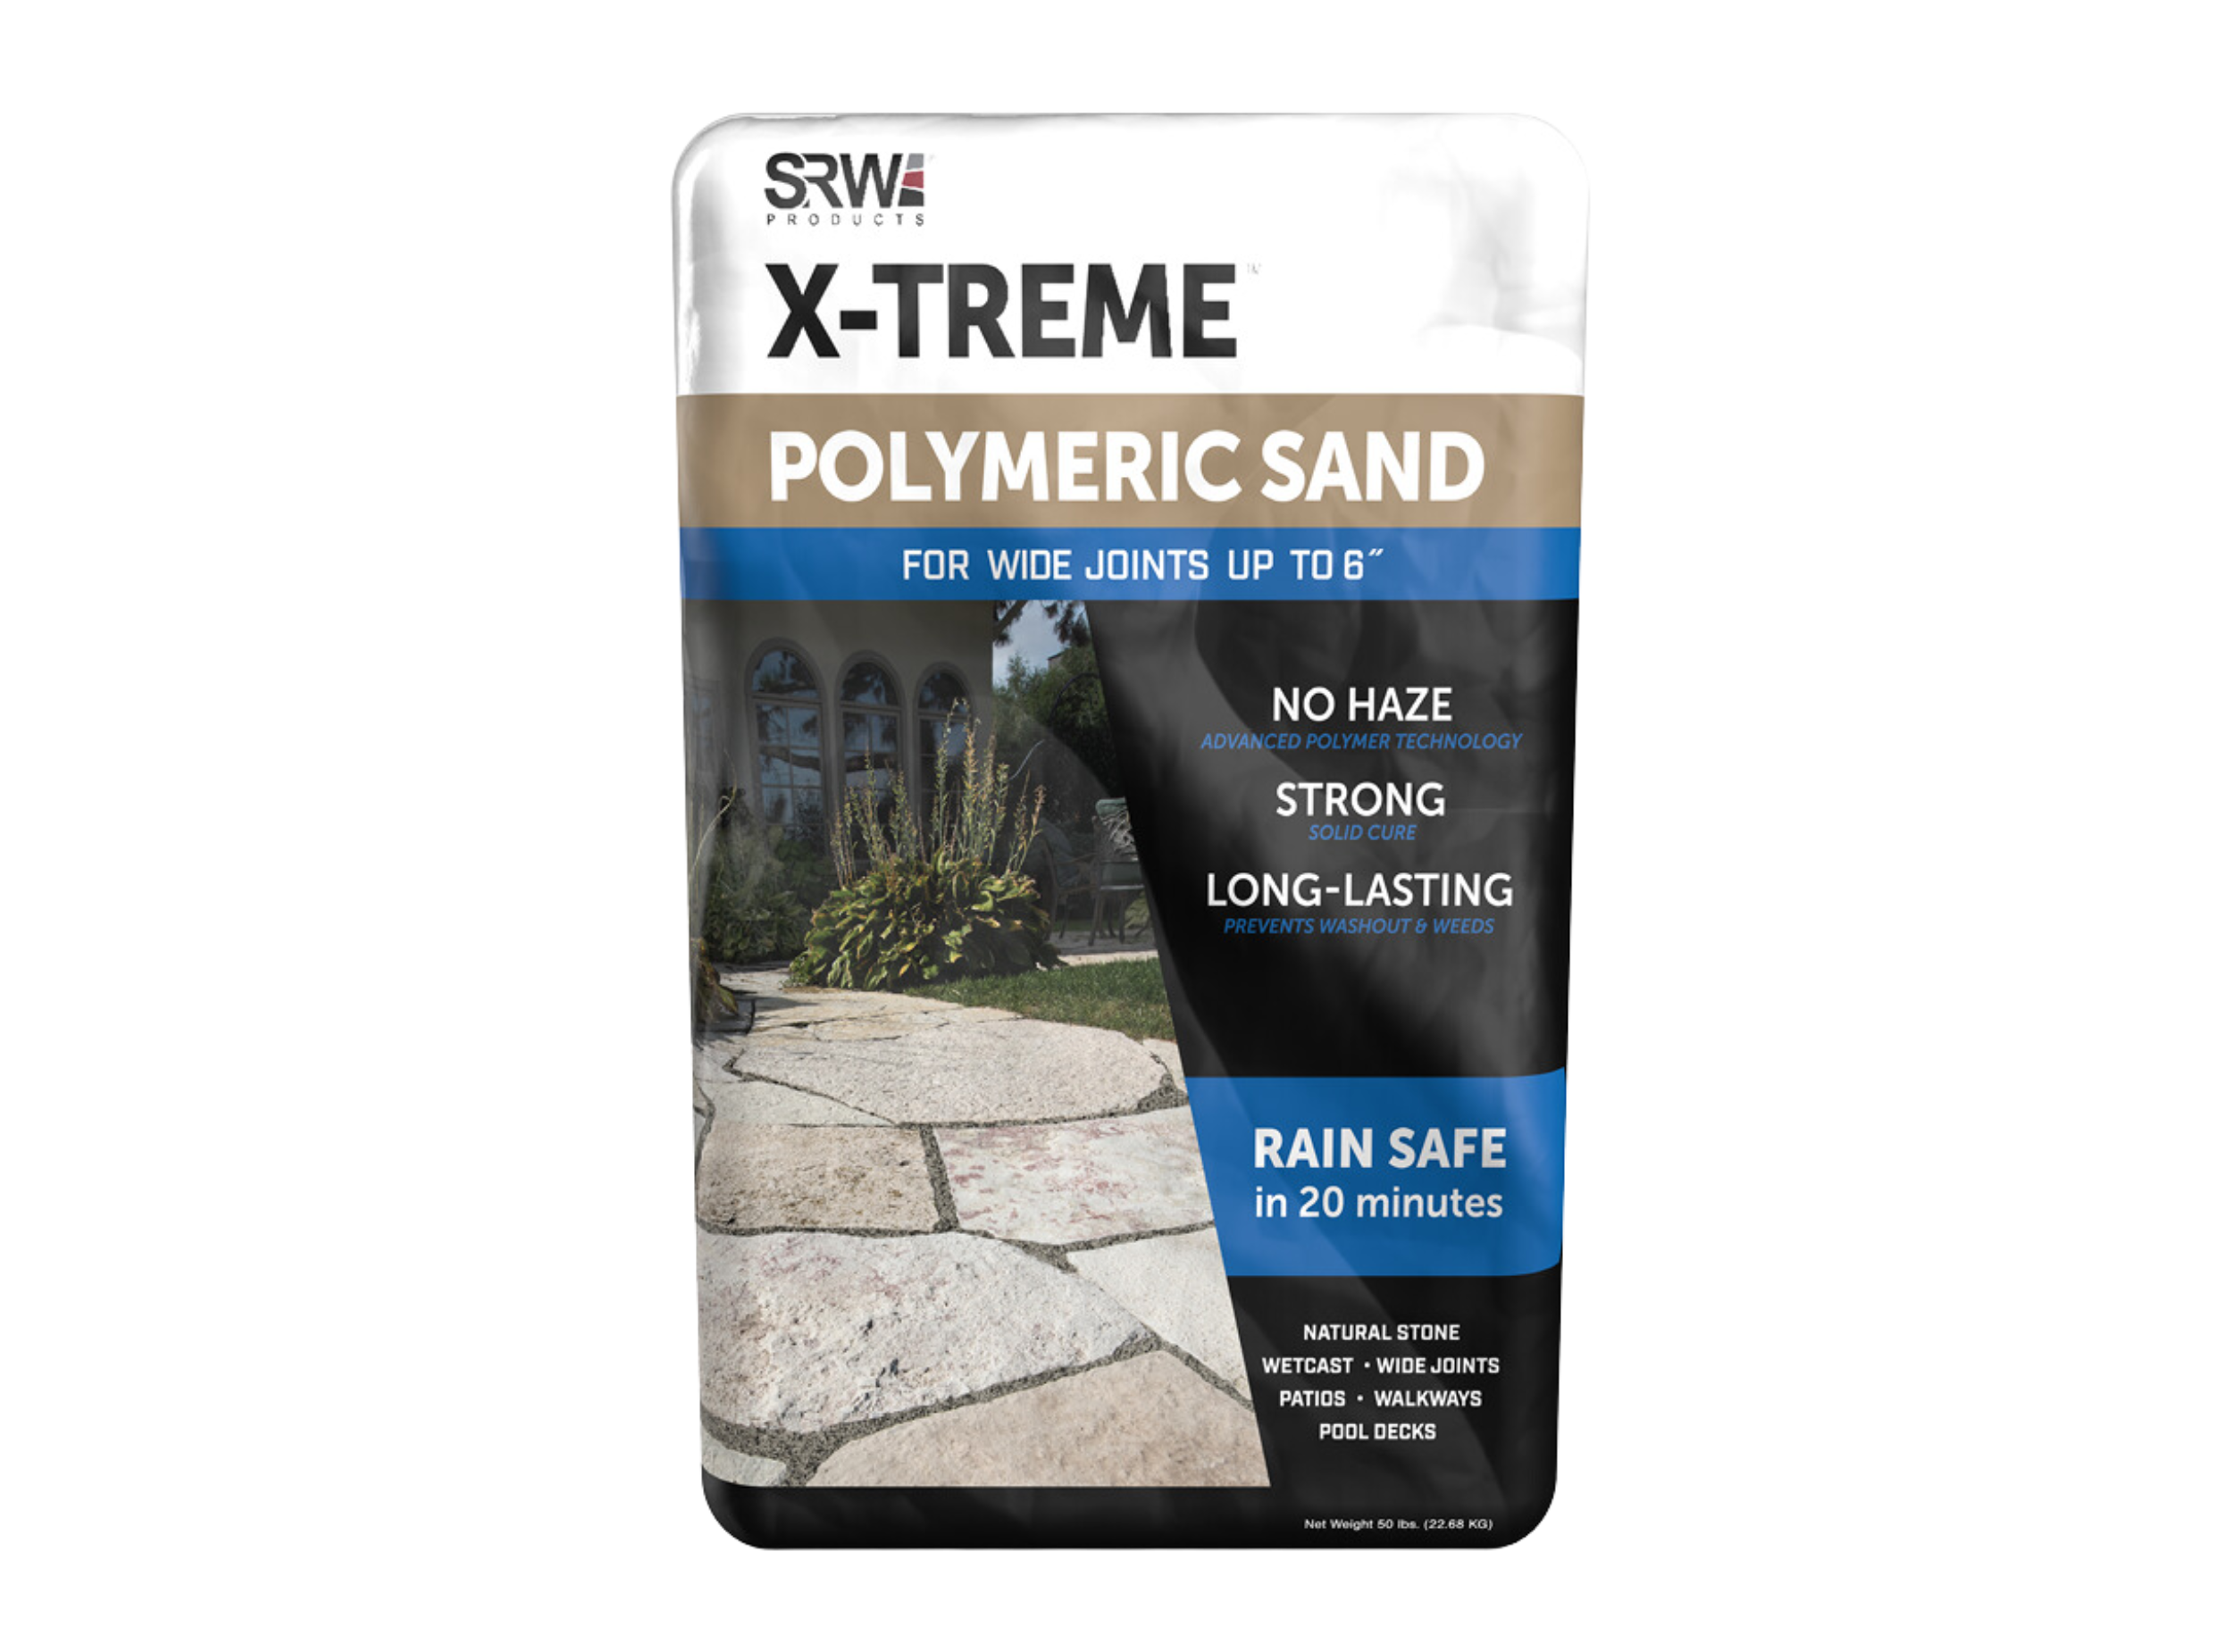 Accessories - polymeric sand in Mid-Atlantic